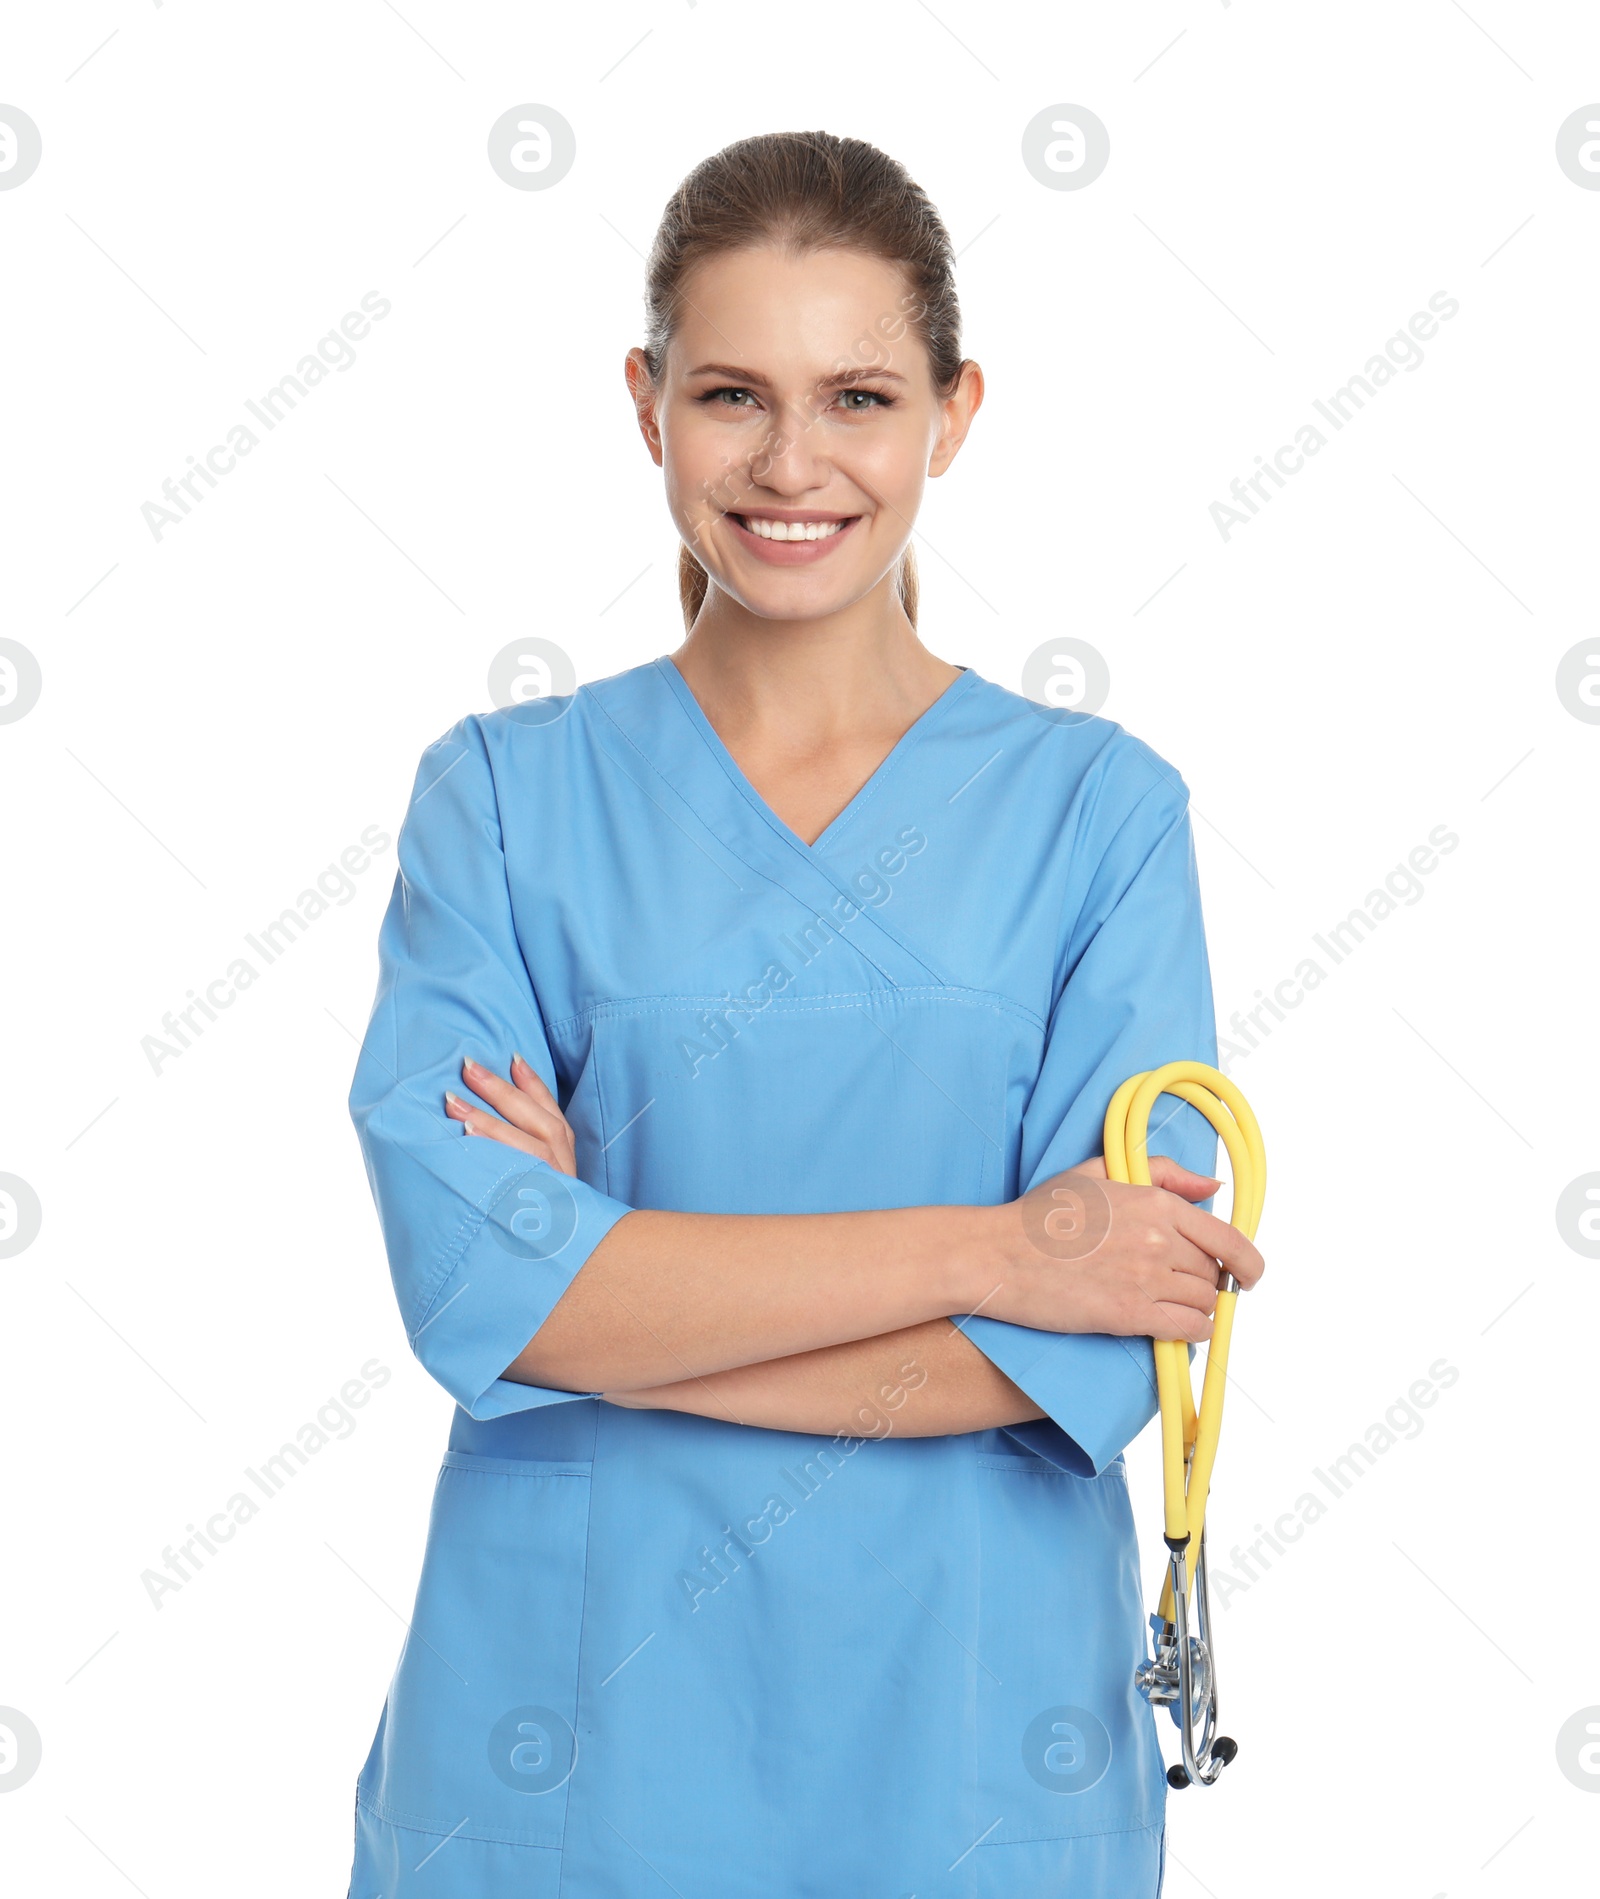 Photo of Portrait of young medical assistant with stethoscope on white background